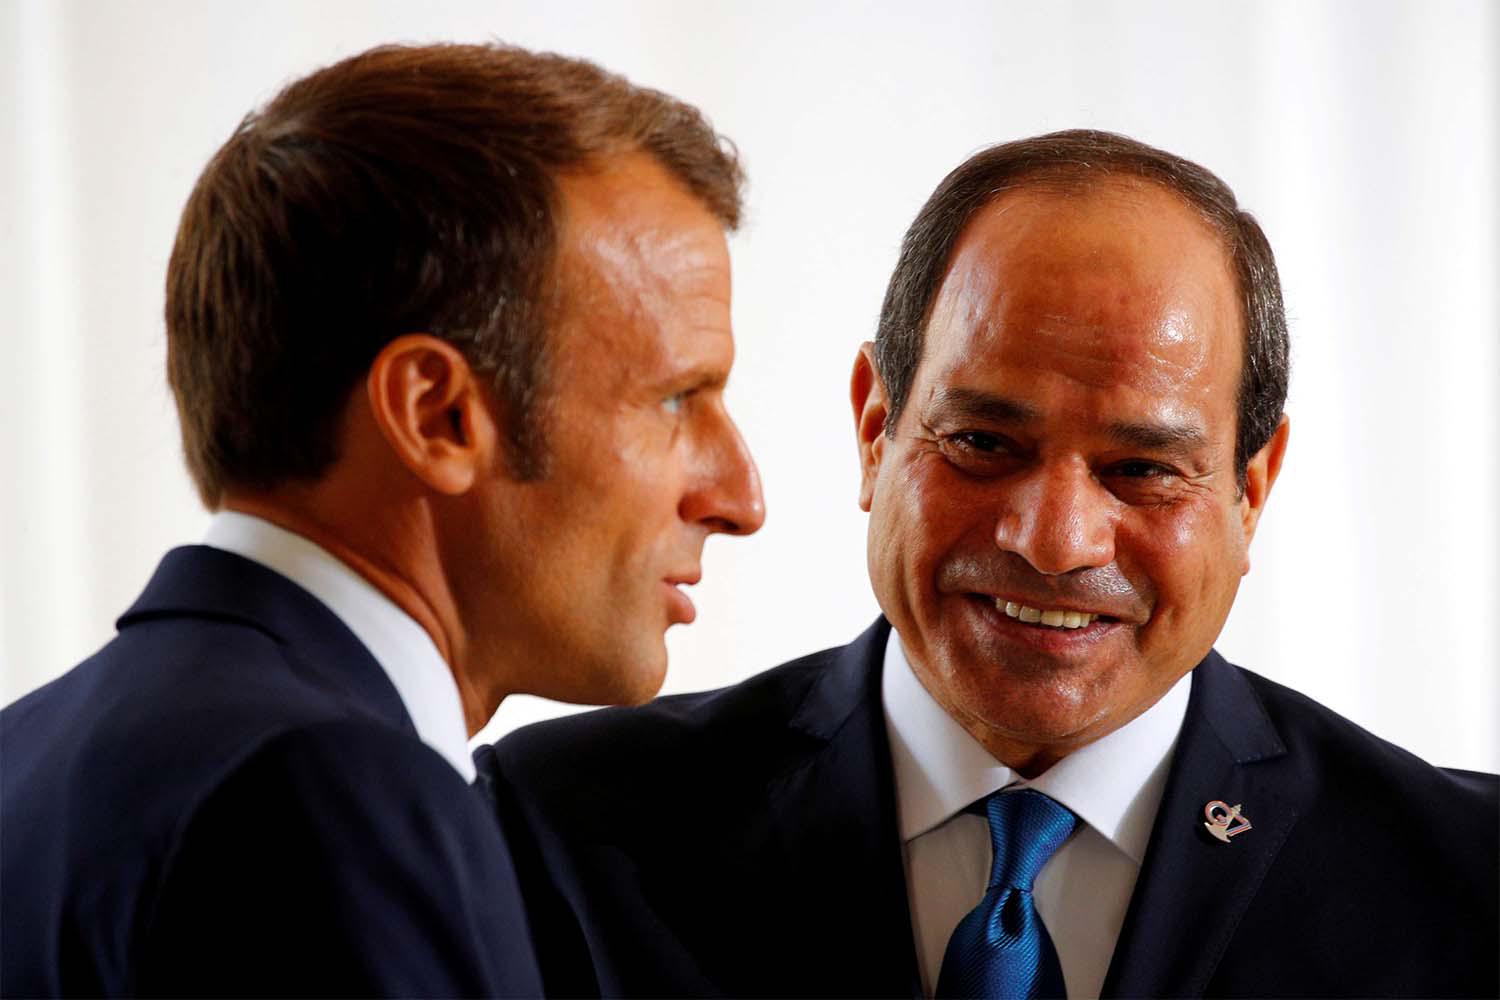 Sisi's visit to France seeks to to underscore close ties between the two countries